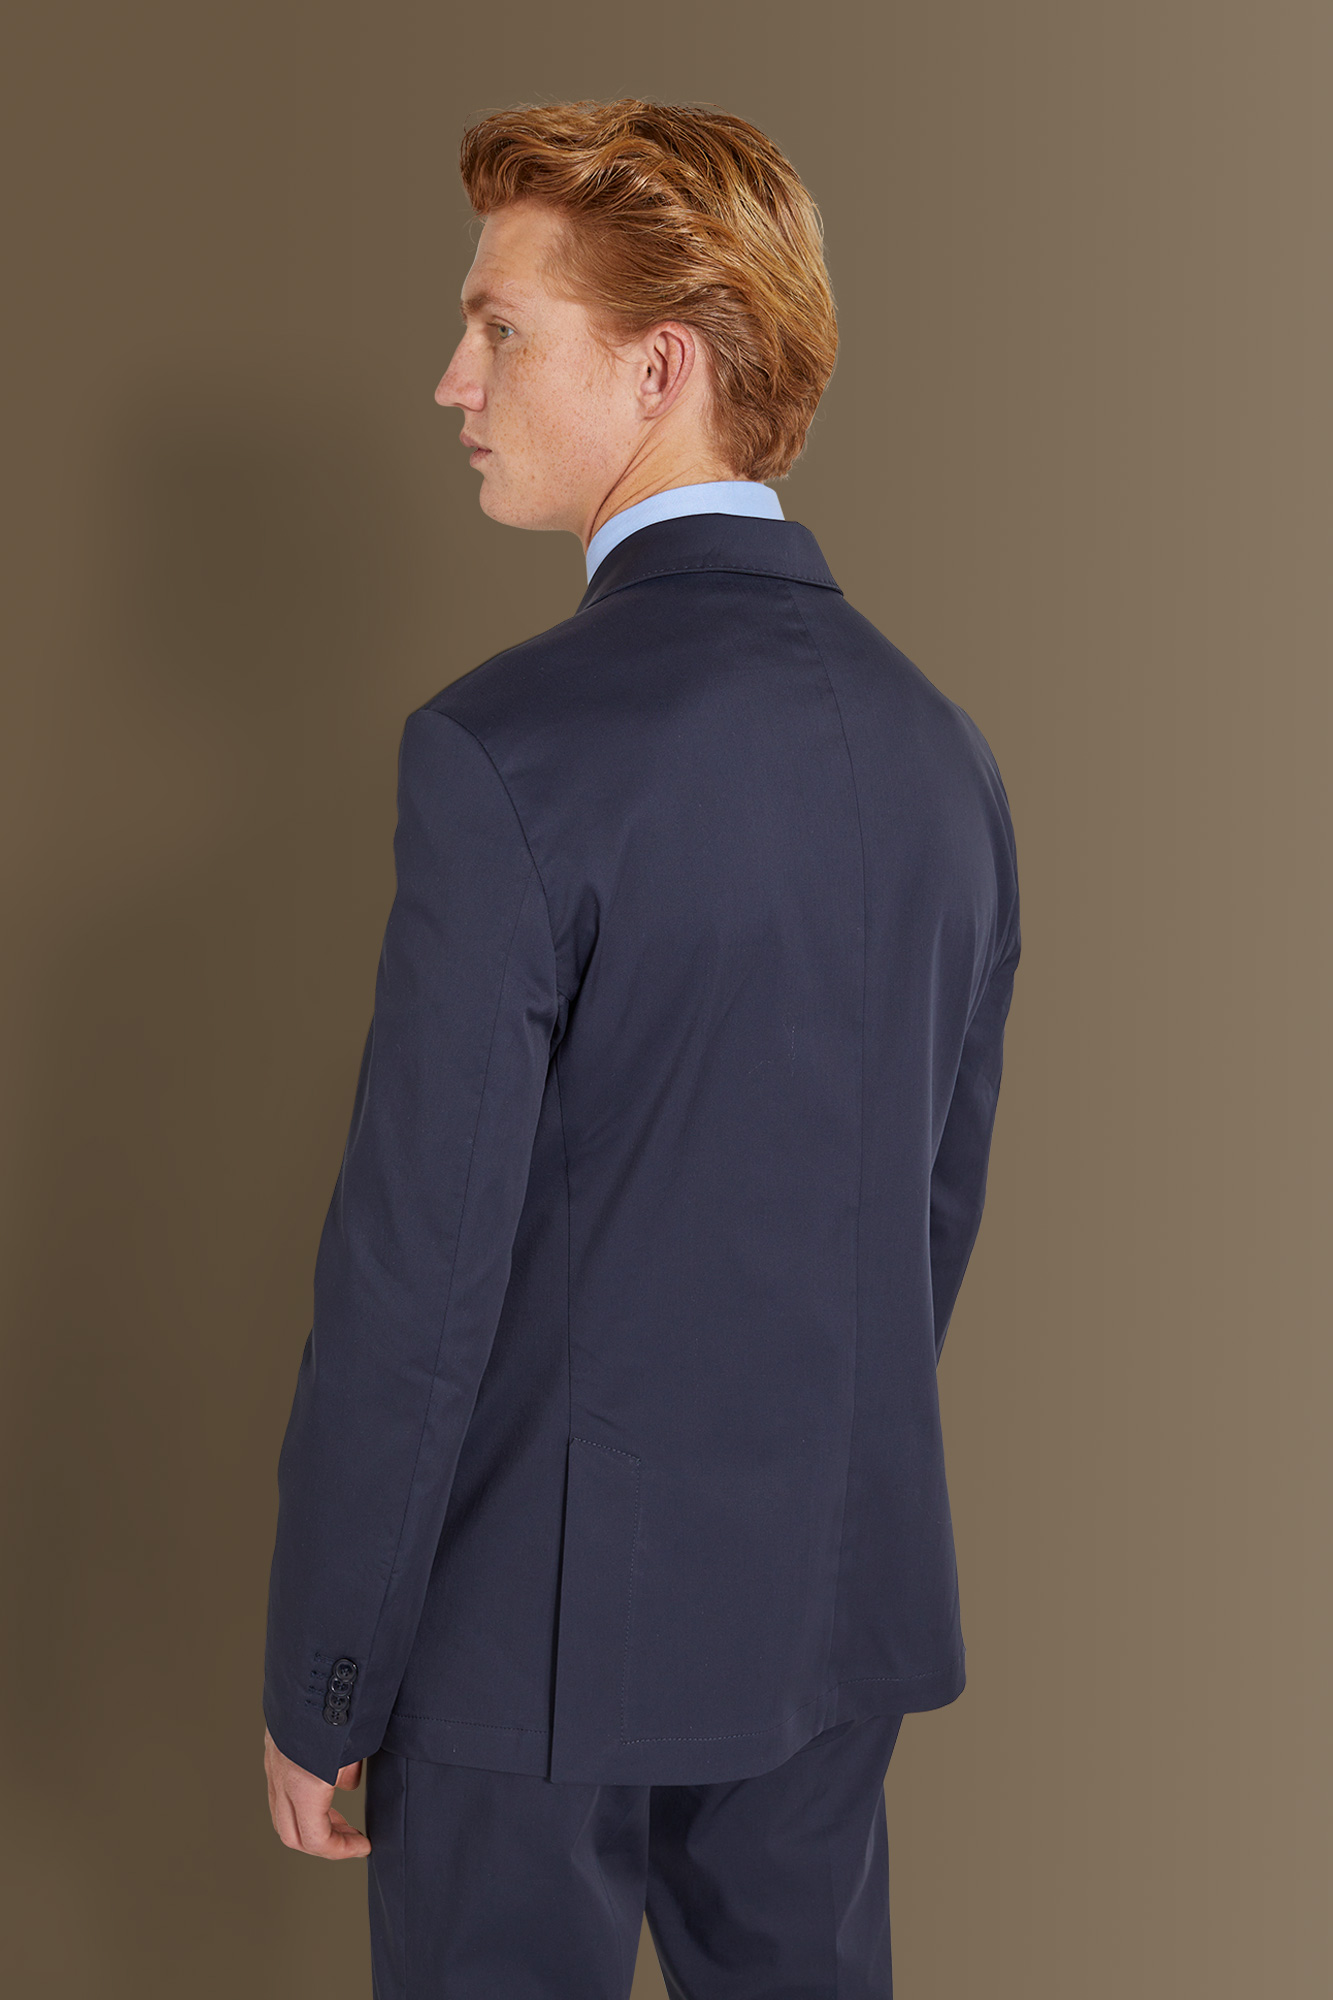 Single breasted suit flat trousers cotton blend fabric solid colour made in italy image number 4